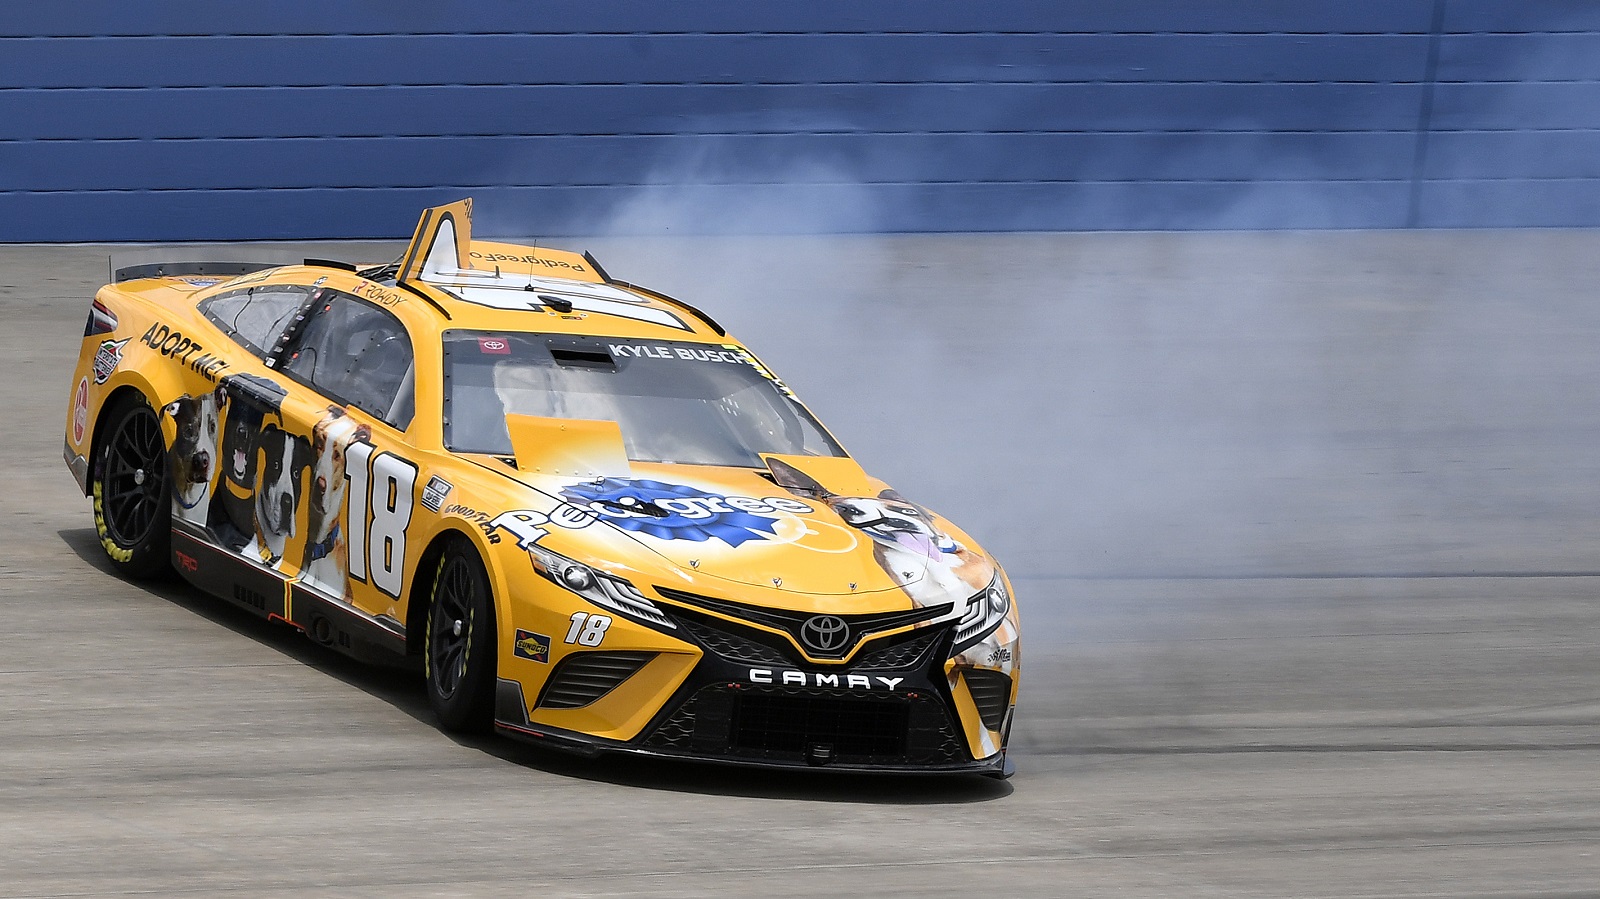 Kyle Busch Is Fighting His Car and Social Media Critics This Weekend in Nashville